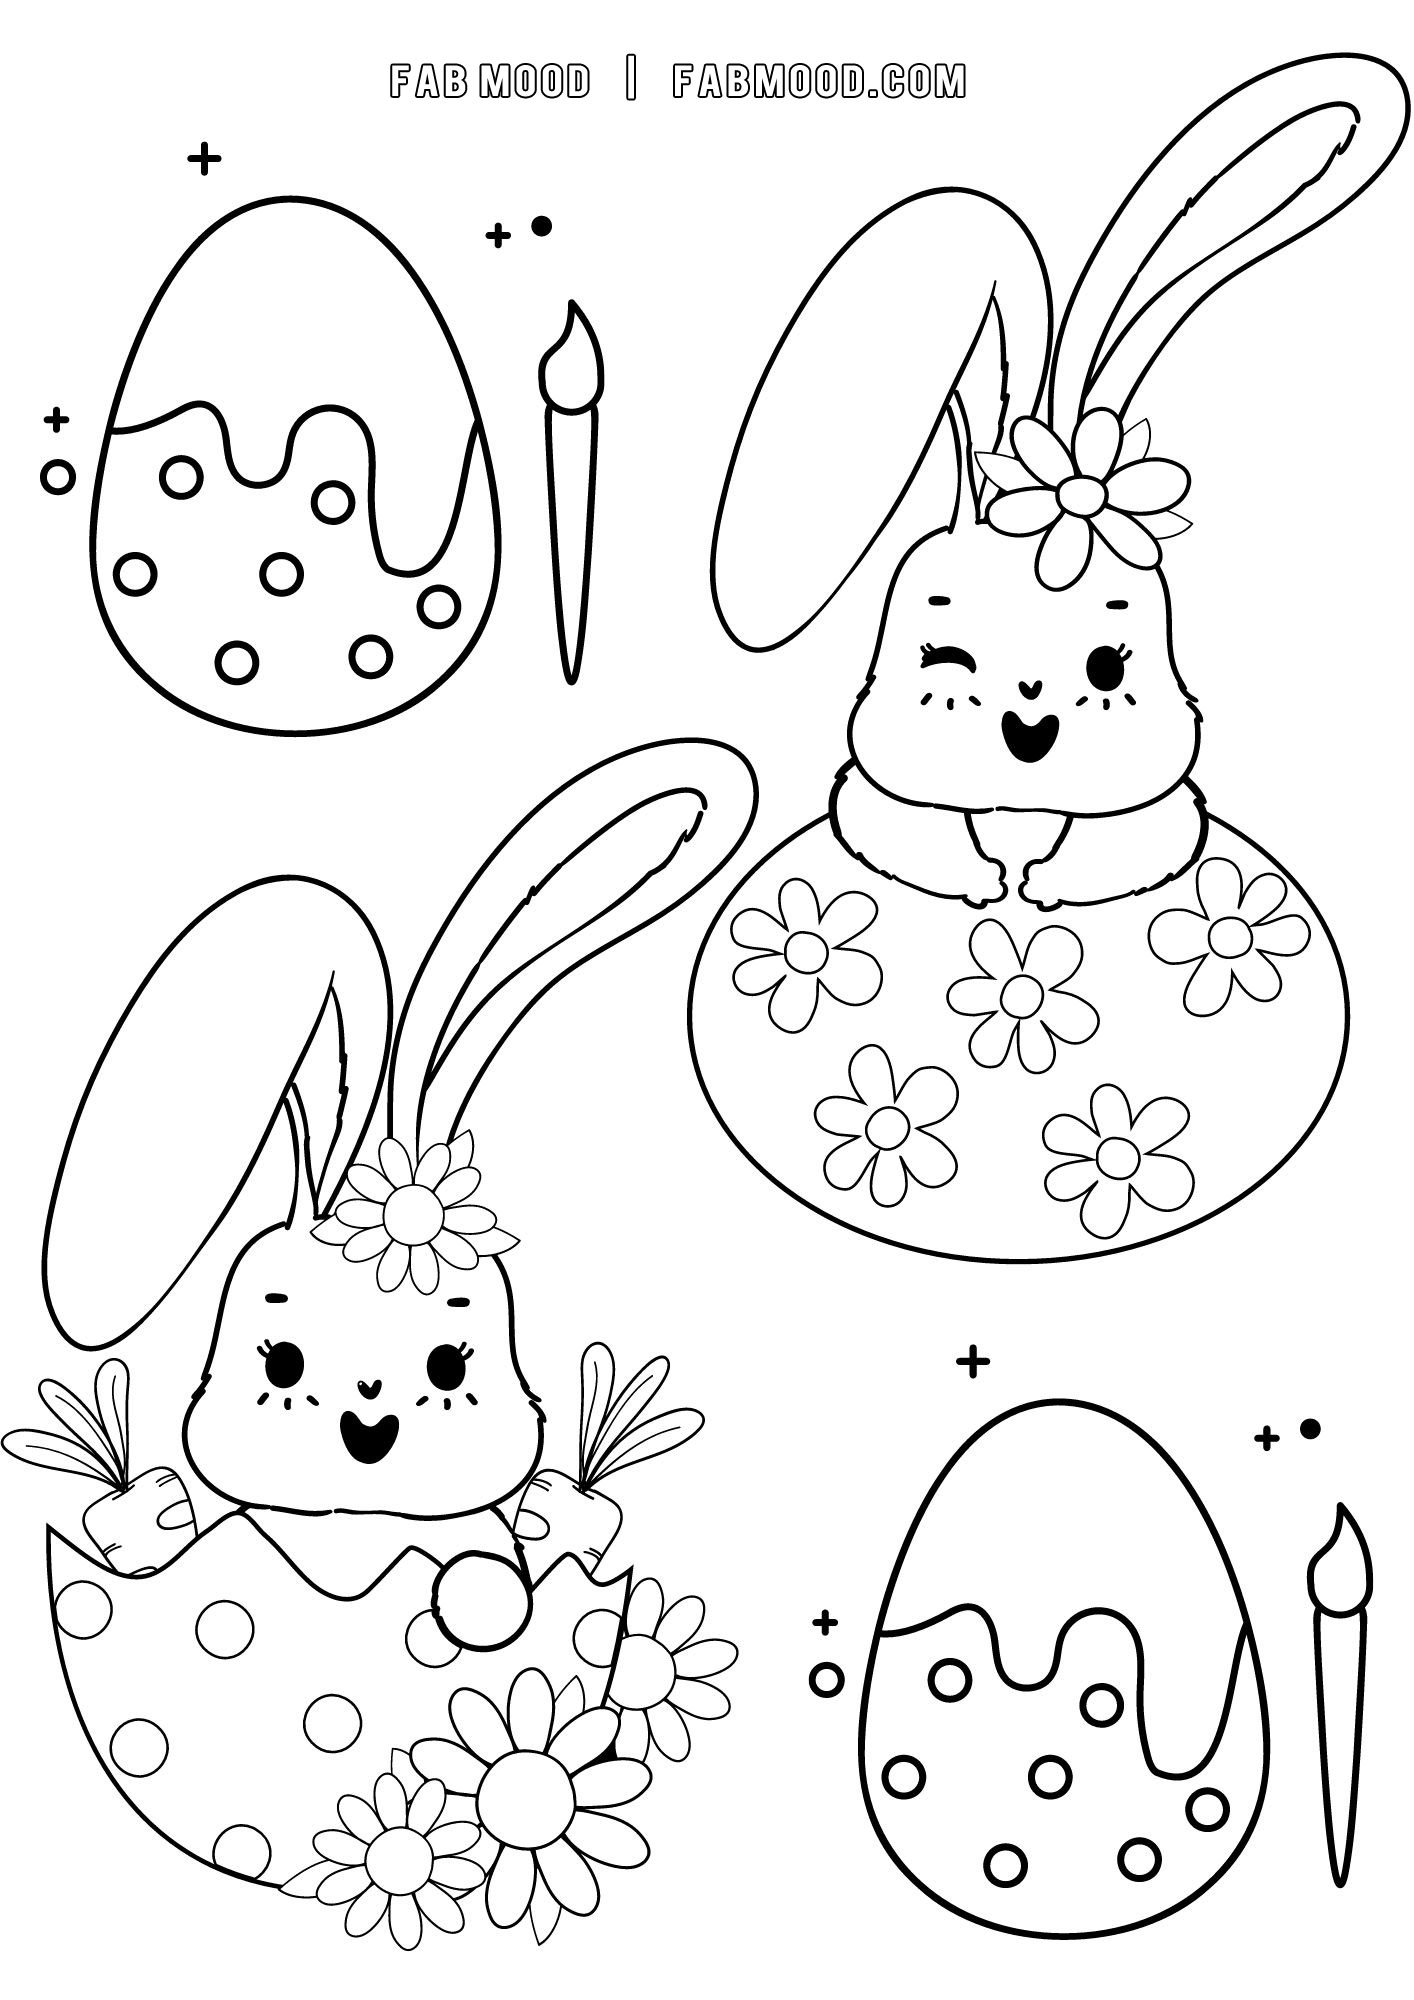 FREE 10 Easter Colouring Pictures : Adorable Bunnies